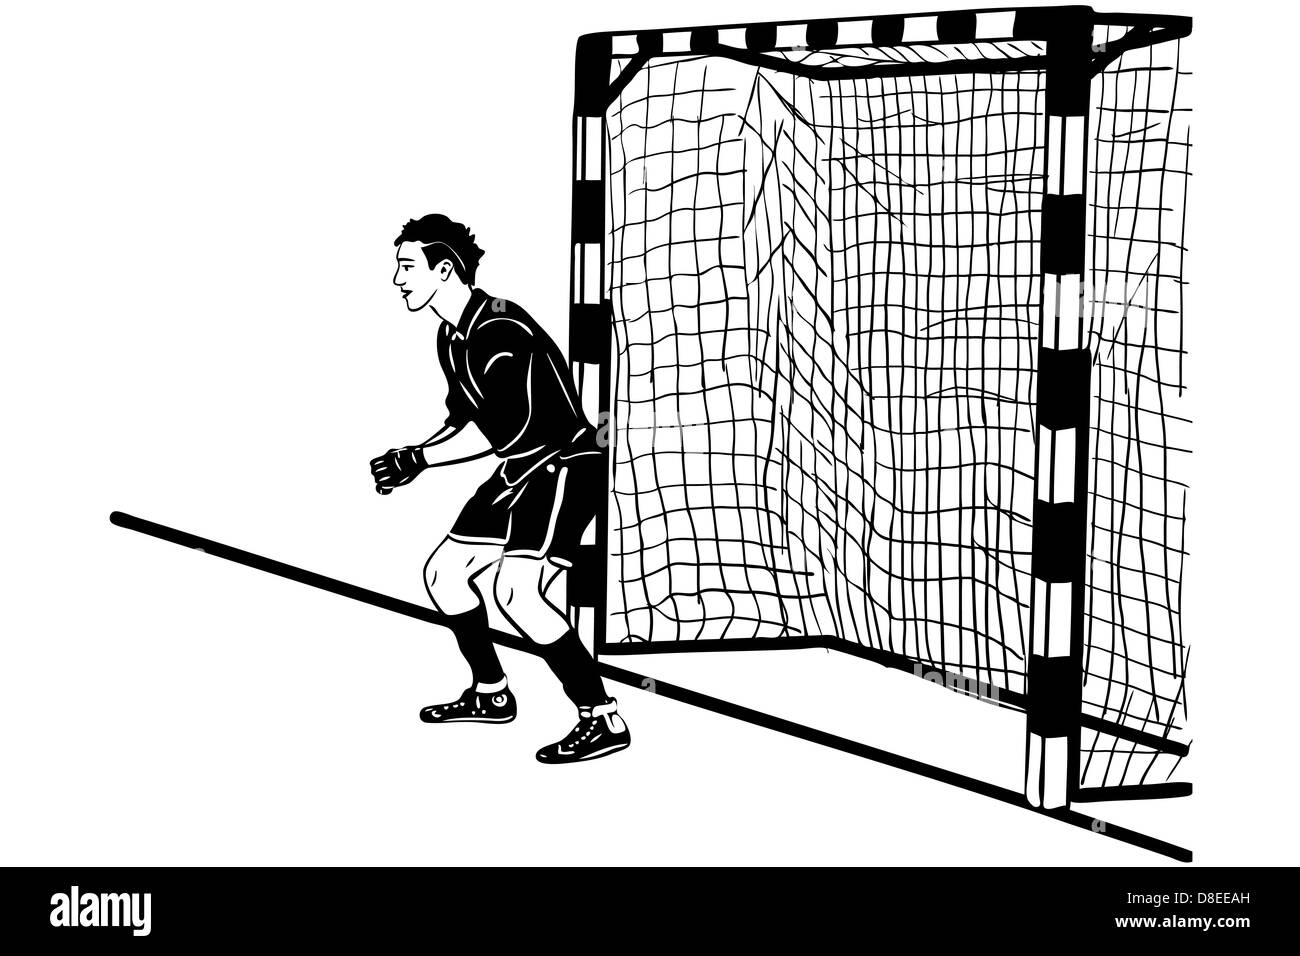 athlete football goalkeeper protects the gate Stock Photo